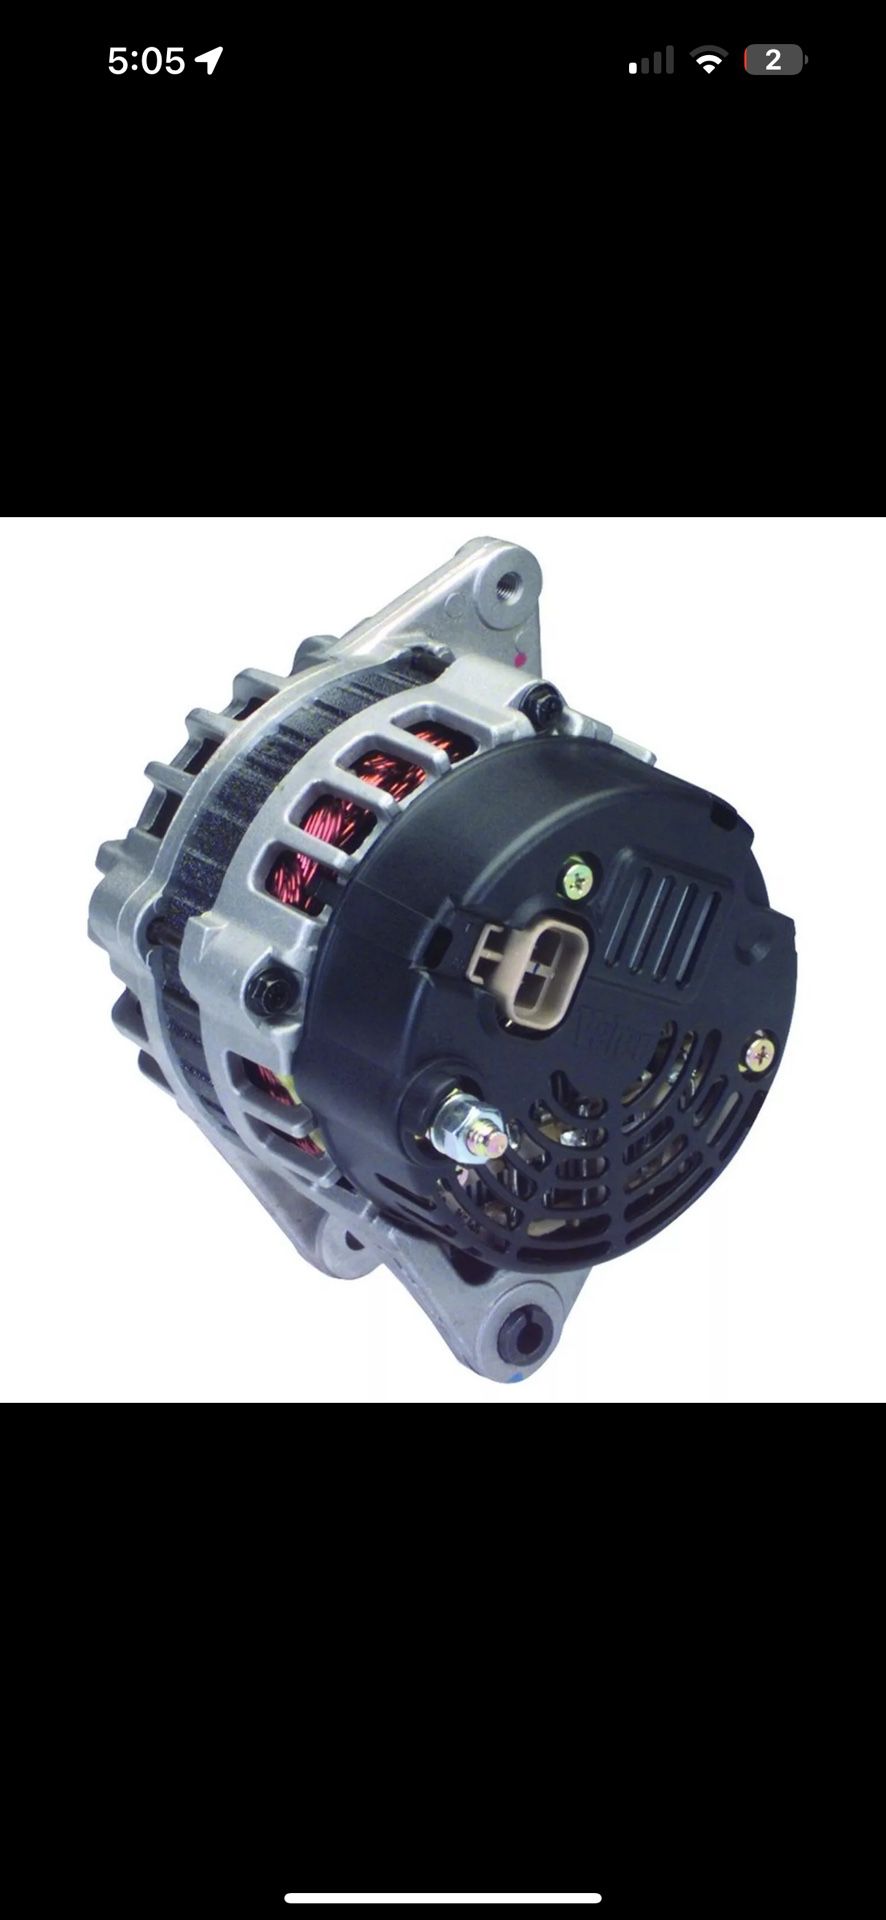 New Alternator For Hyundai Accent 1.5L 1.6L 00-02 Elantra 2.0L 01-02 37(contact info removed)0